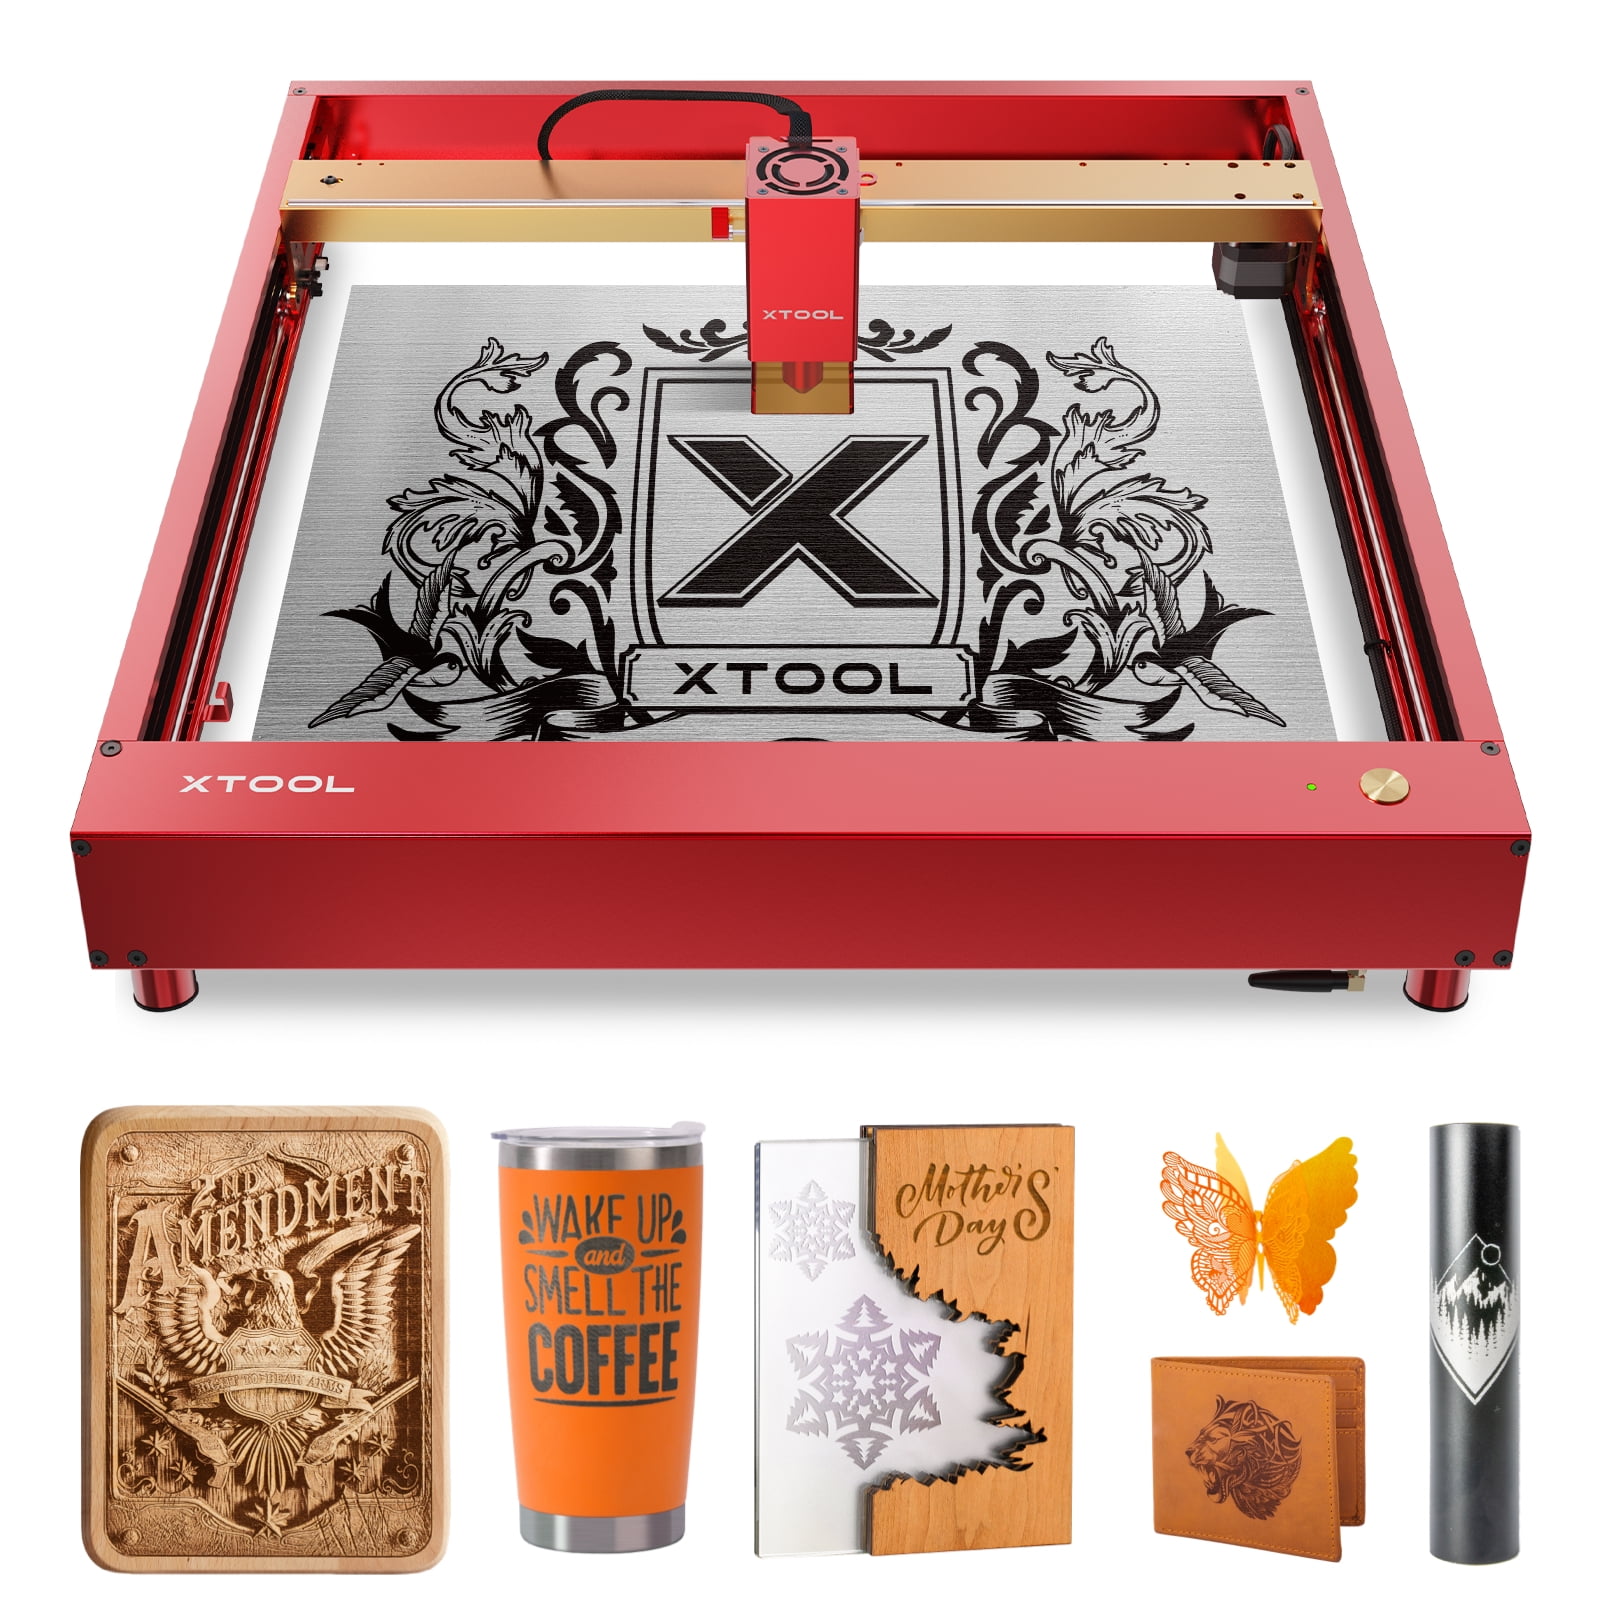 xTool D1 Pro Laser Engraver, 5-7.5w Output Power 400mms Ultra Fast 0.06mm  Ultra-Fine Compressed Spot Higher Accuracy DIY Laser Engraving and Cutting